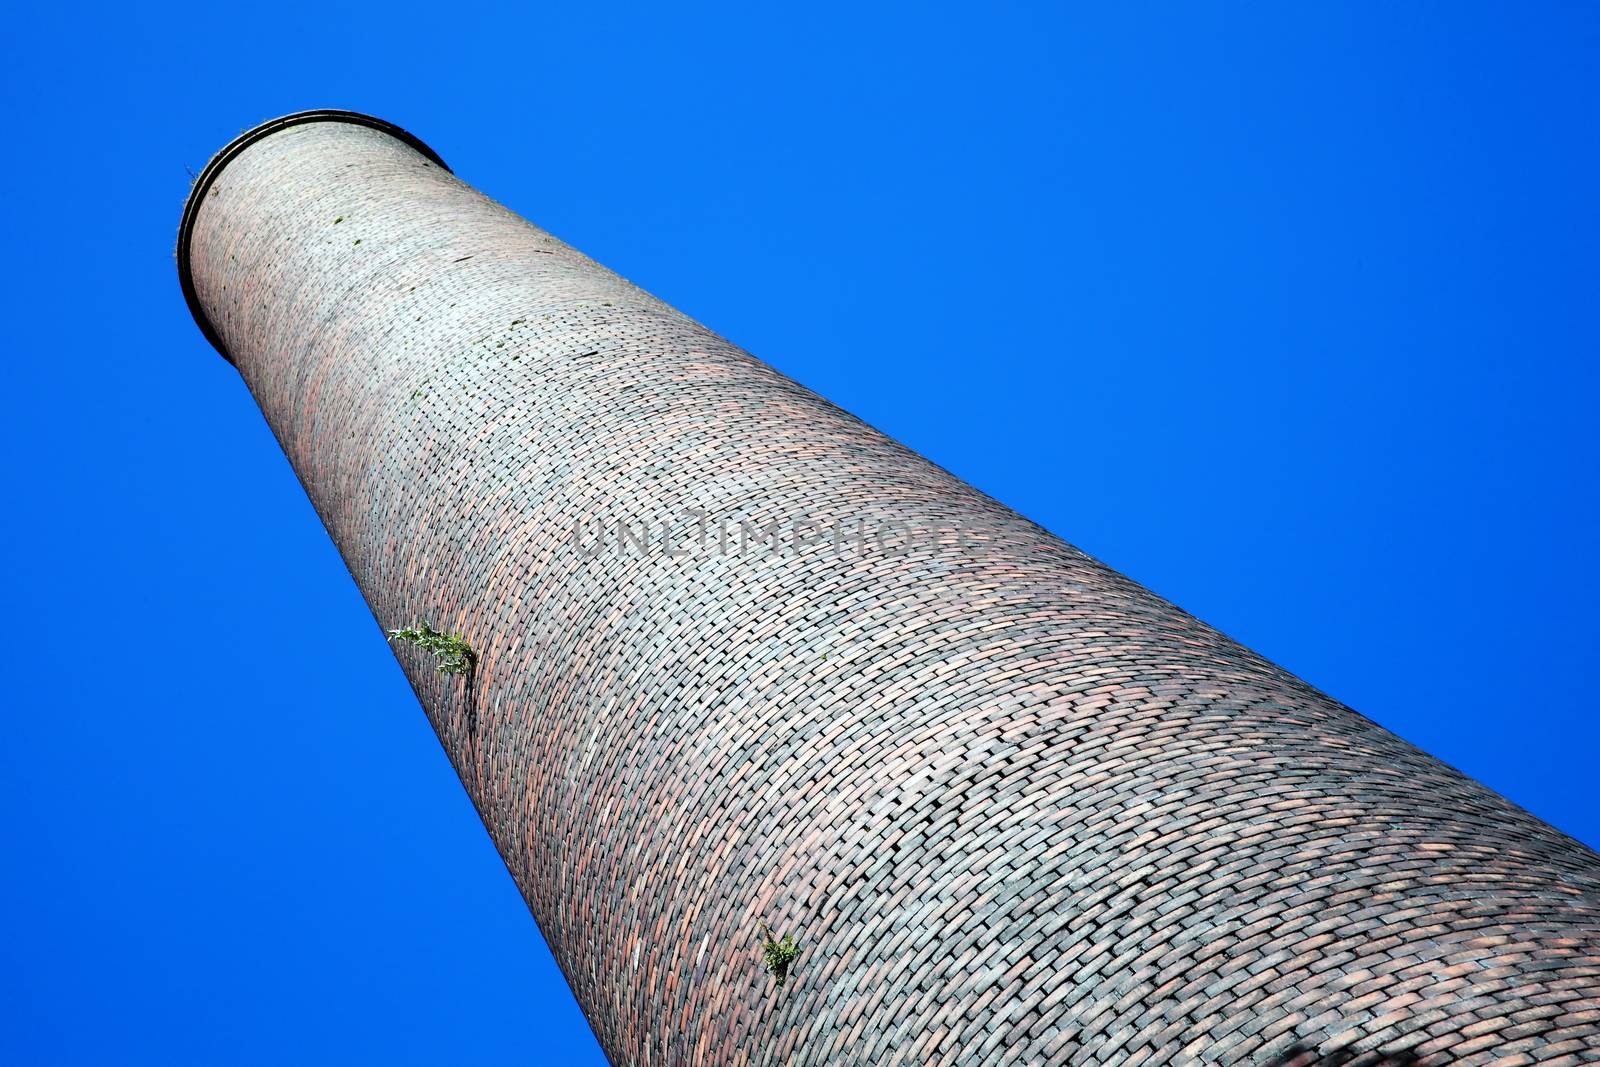 Old  obsolete smoke stack industrial chimney from the manufacturing Industrial Revolution stock photo